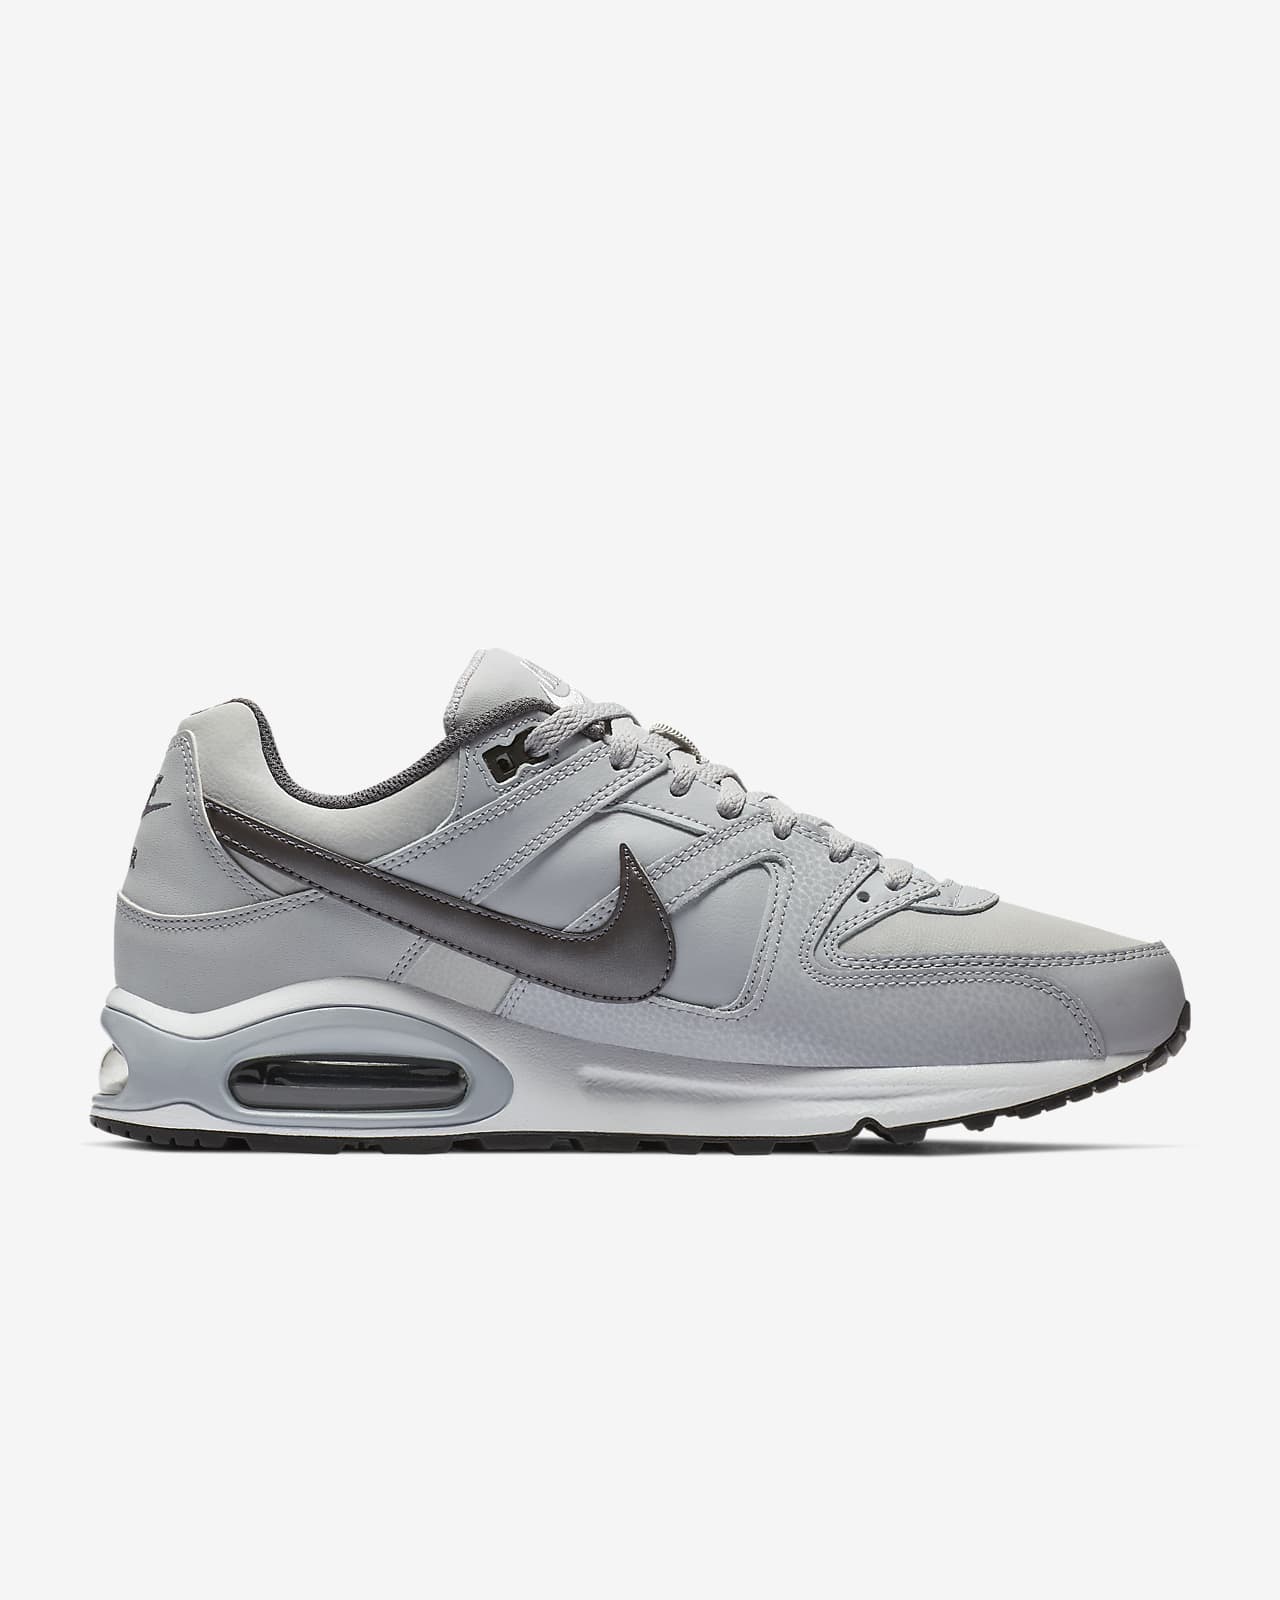 nike air max command leather hombre